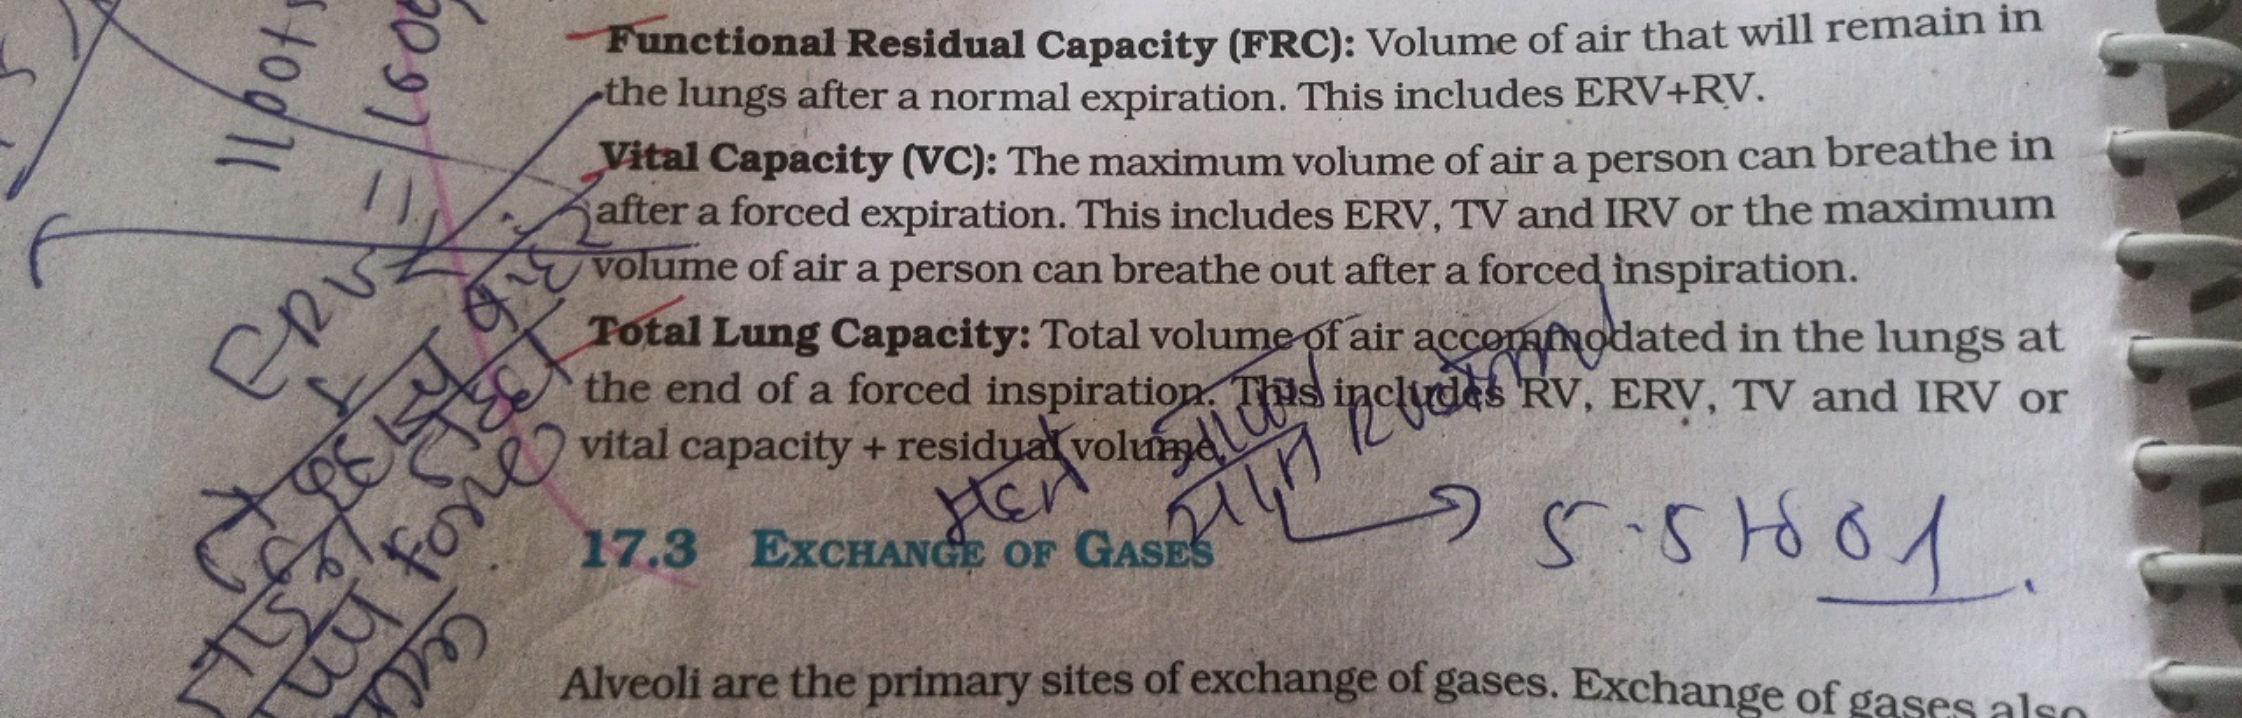 Functional Residual Capacity (FRC): Volume of air that will remain in 